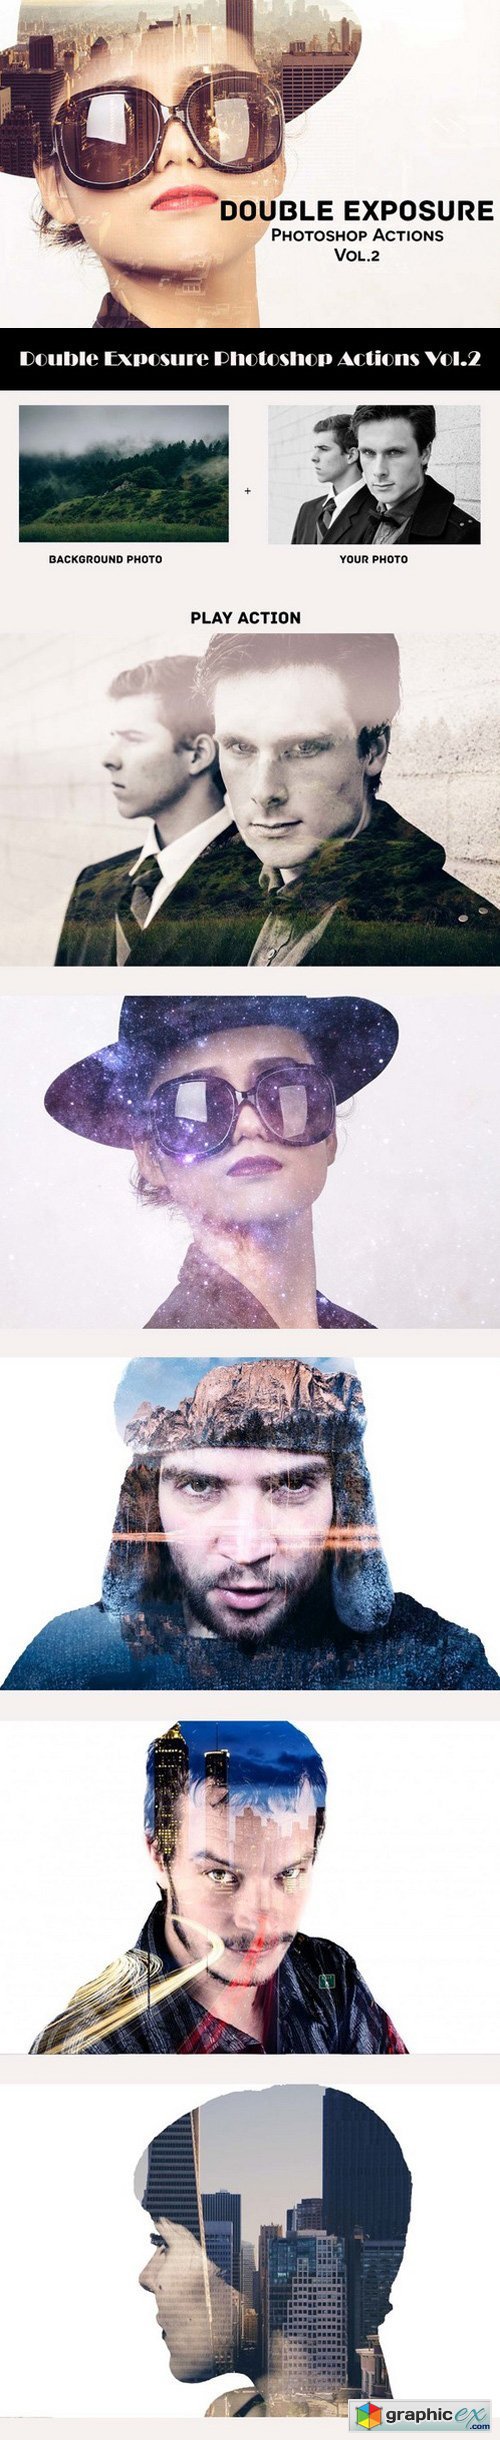 DOUBLE EXPOSURE PHOTOSHOP ACTIONS V2